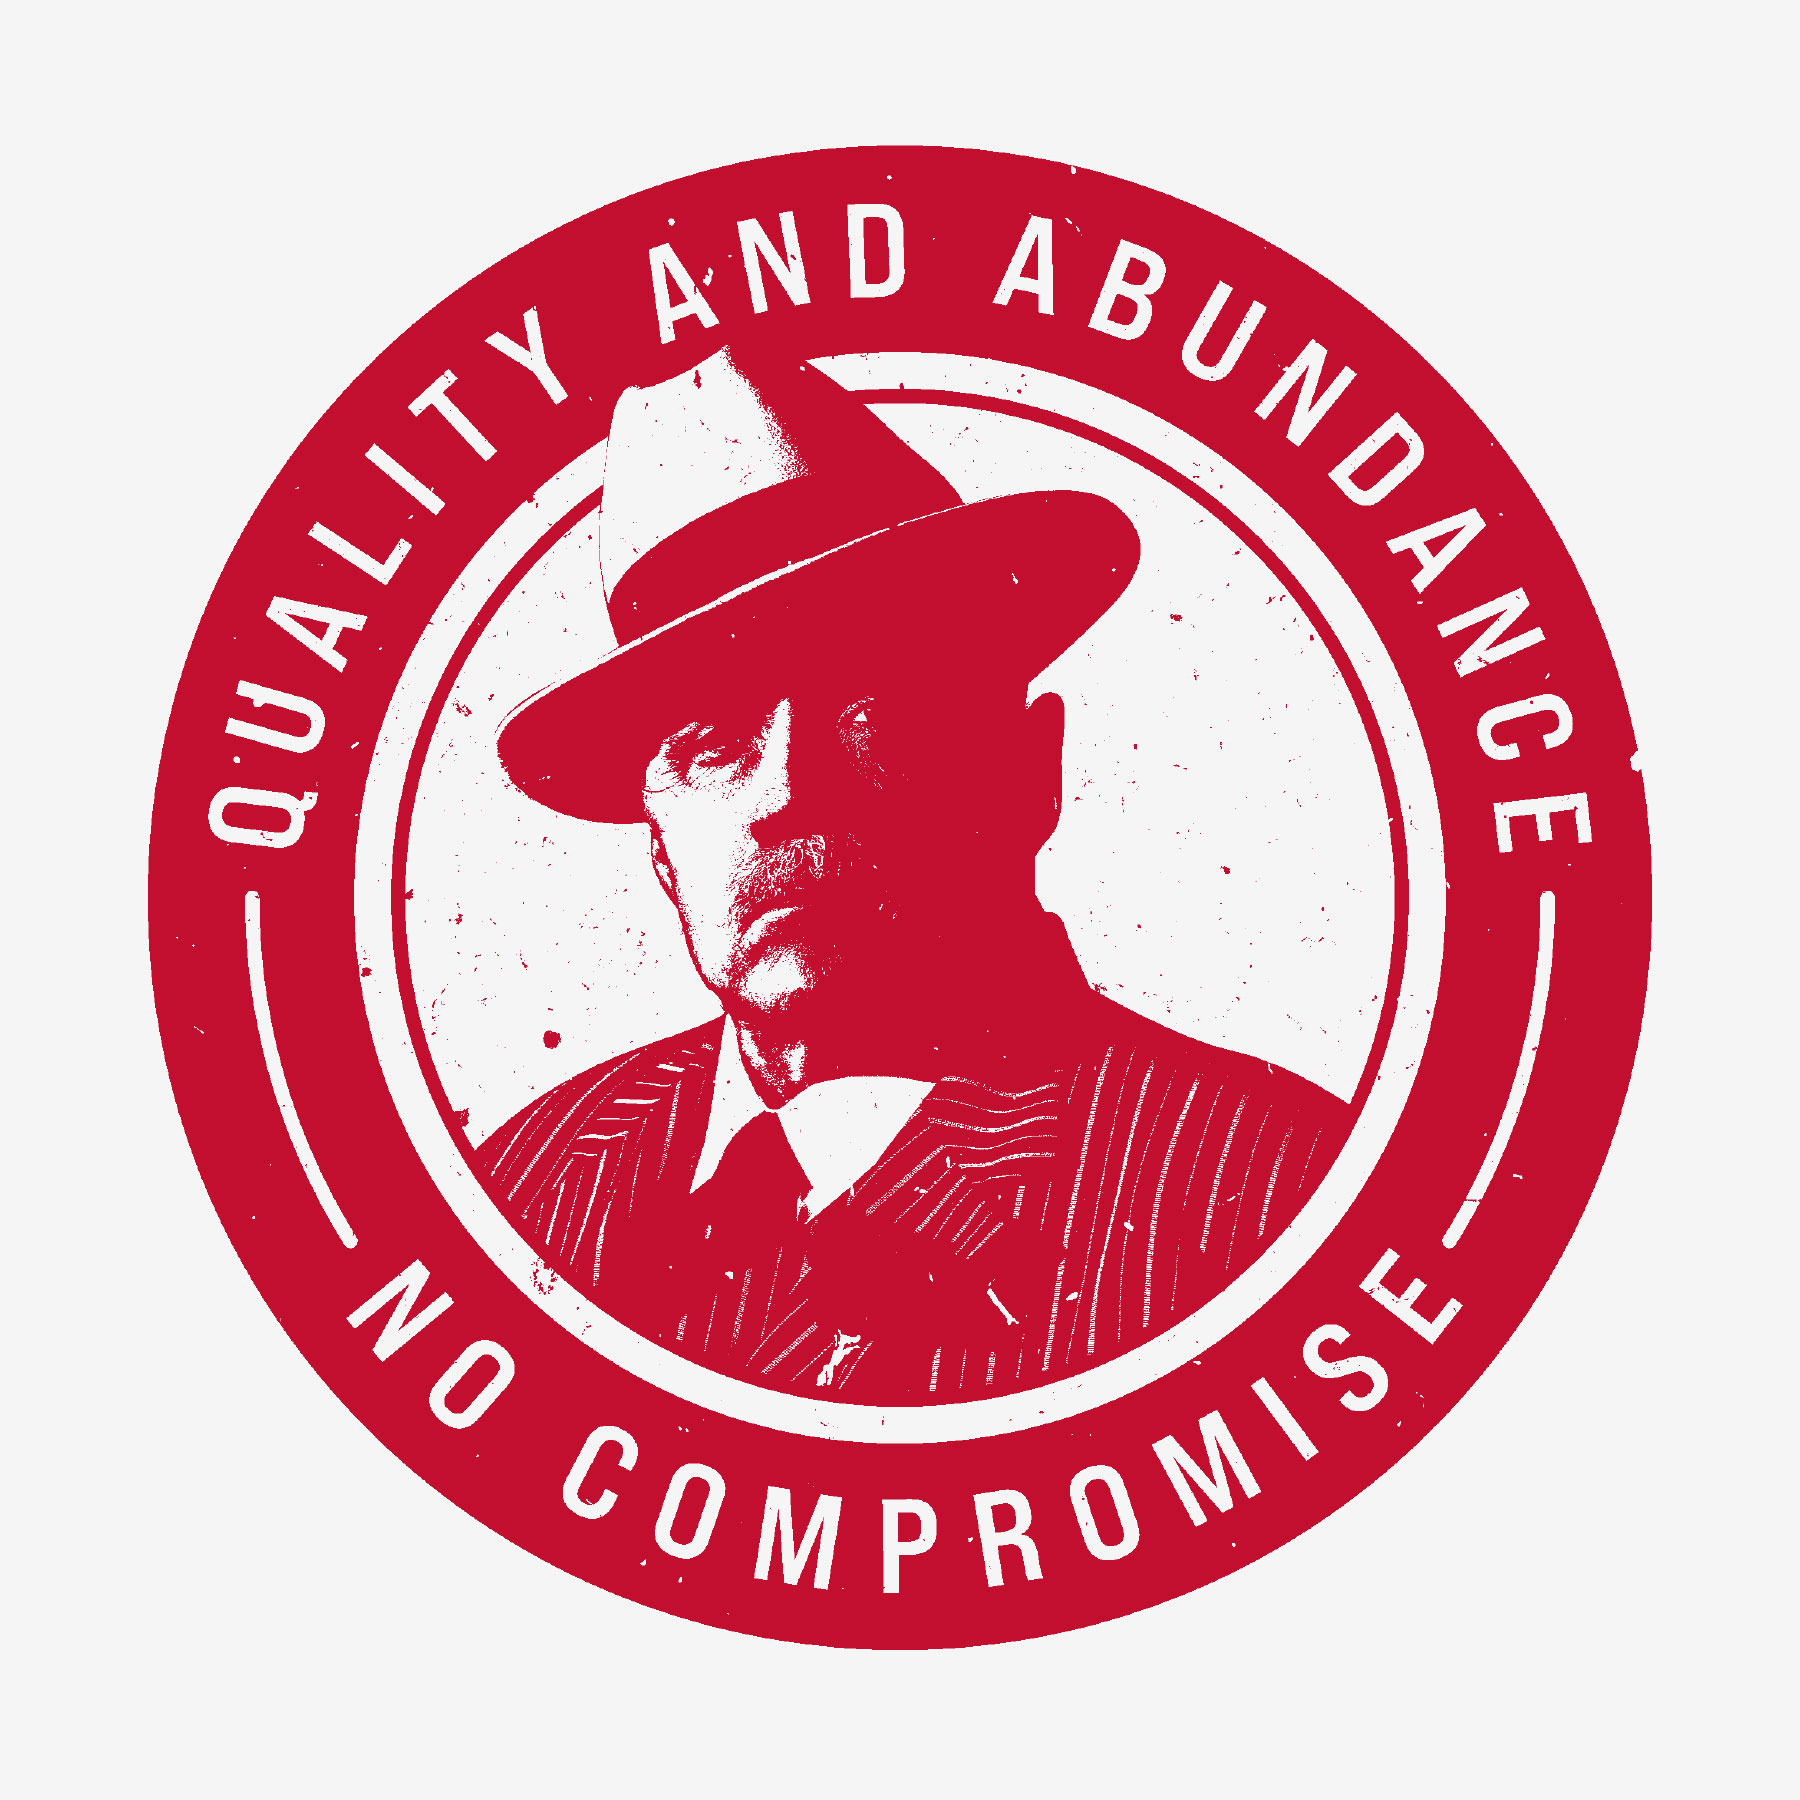 Quality and Abundance - No Compromise